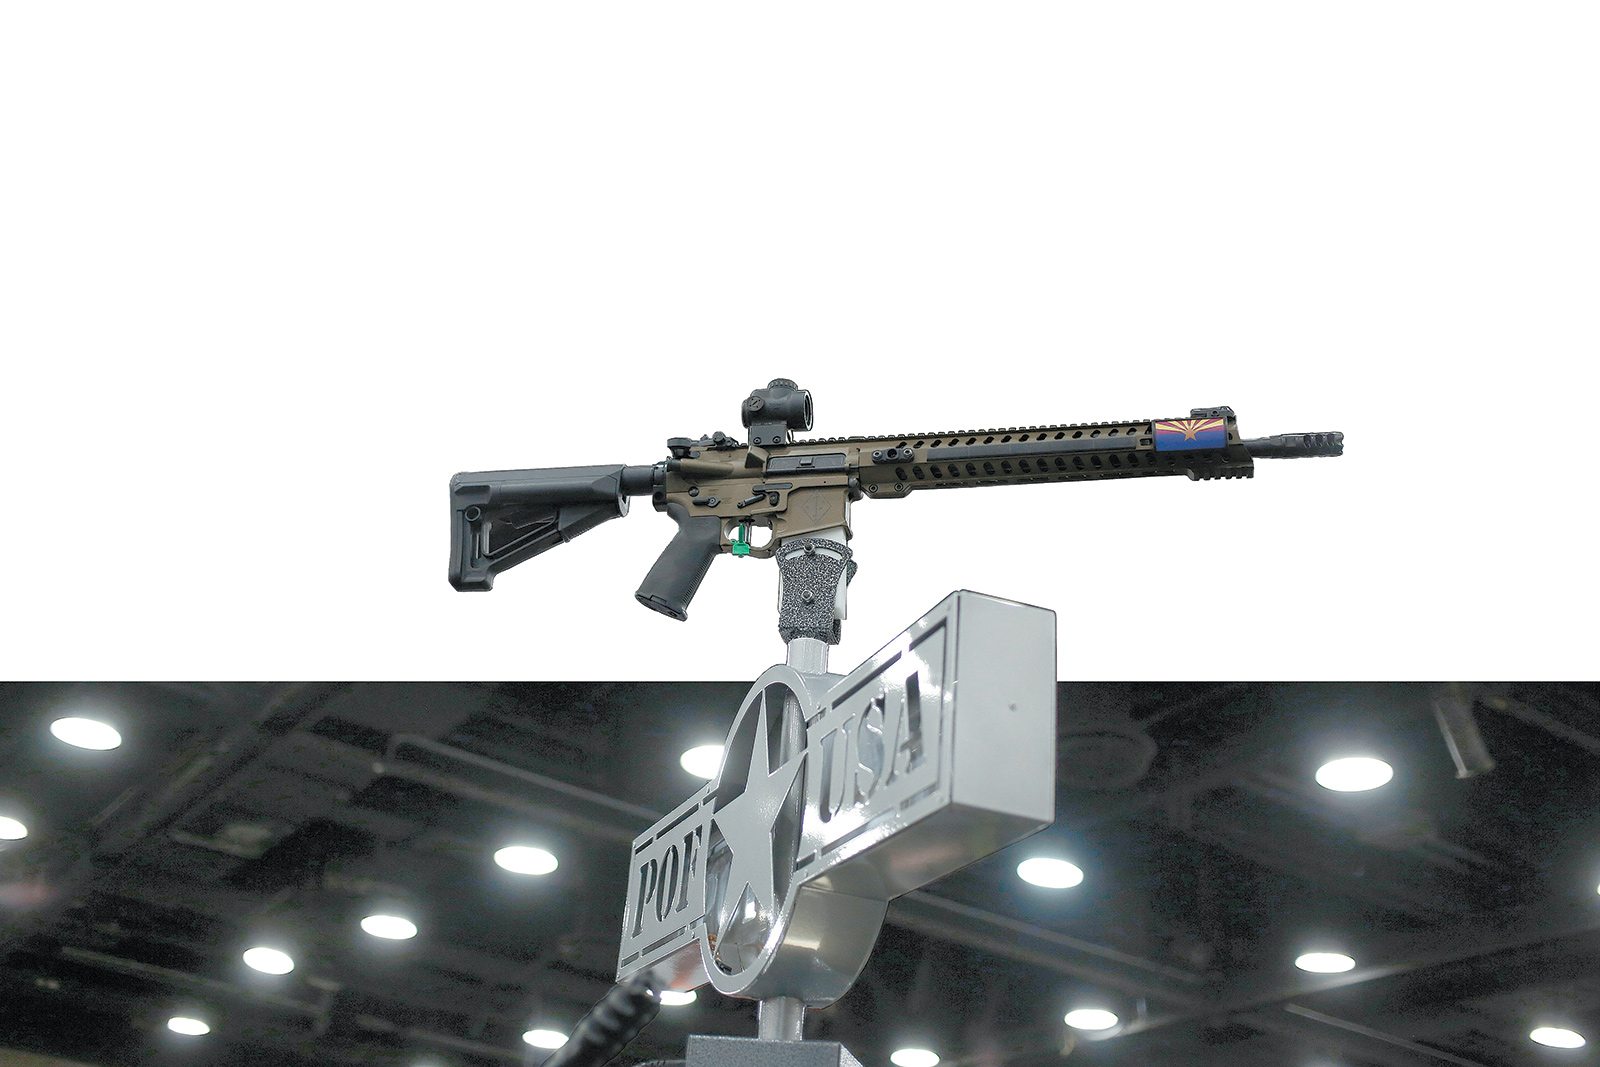 An AR-15 rifle, an assault weapon similar to the one used by Omar Mateen in the June 12 shooting in Orlando, on display at the National Rifle Association’s annual meeting, Louisville, Kentucky, May 20, 2016